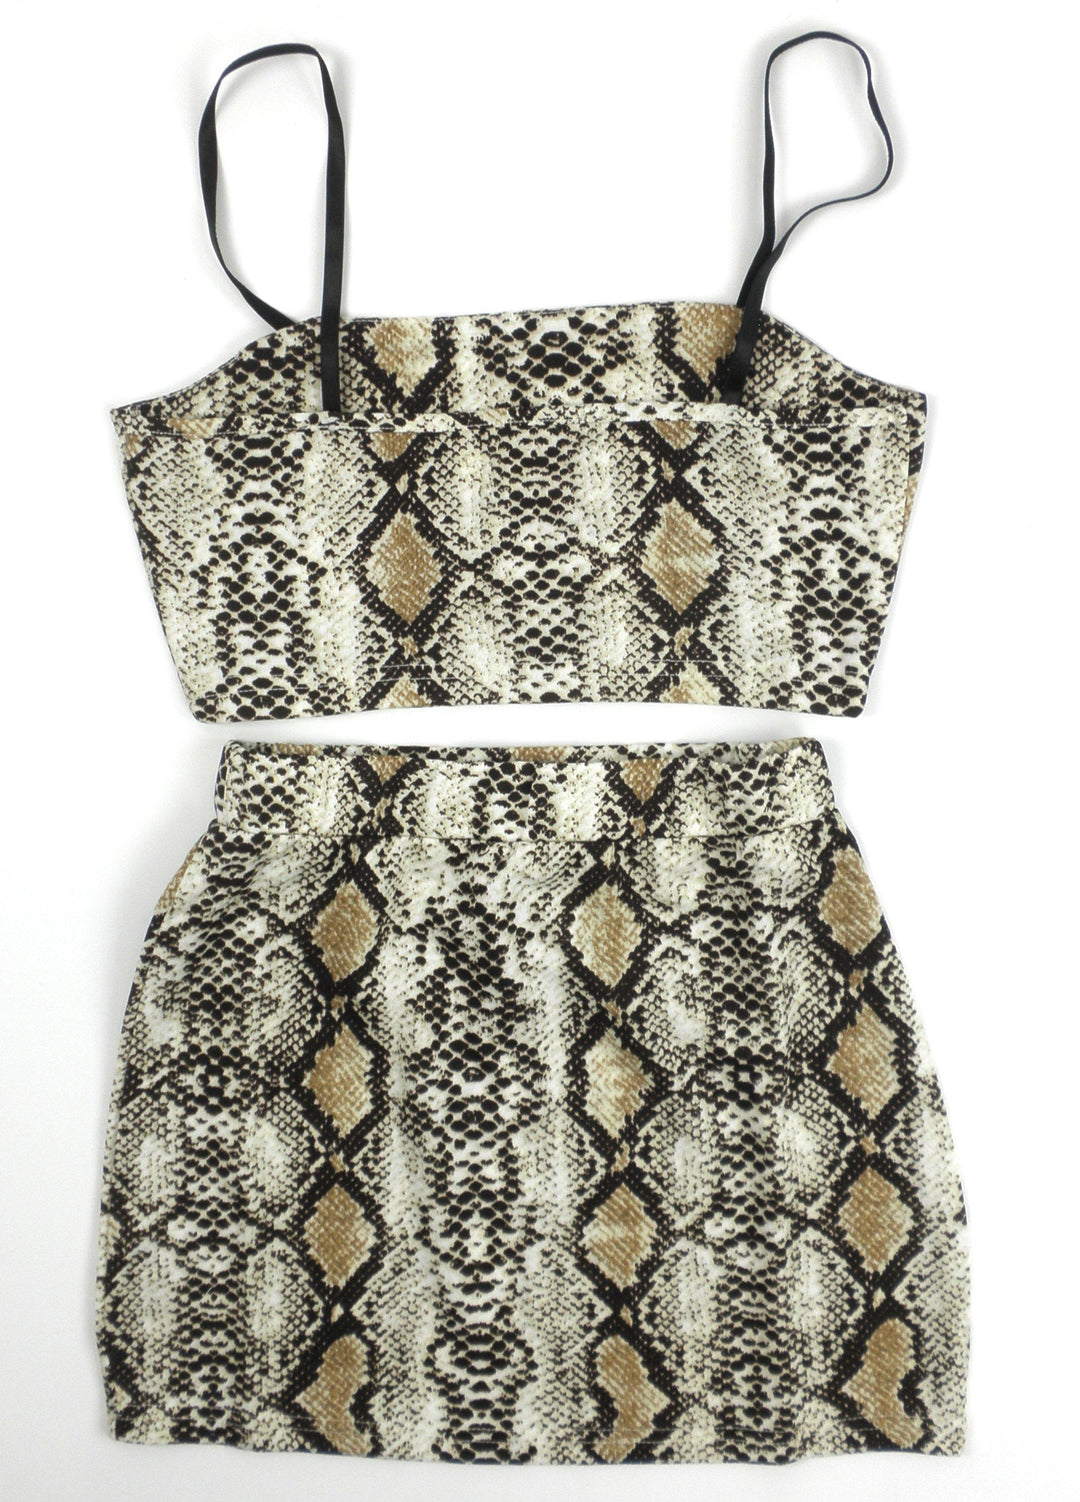 Zaful Brown Snakeskin Fitted Skirt Set - Small - The Fashion Foundation - {{ discount designer}}